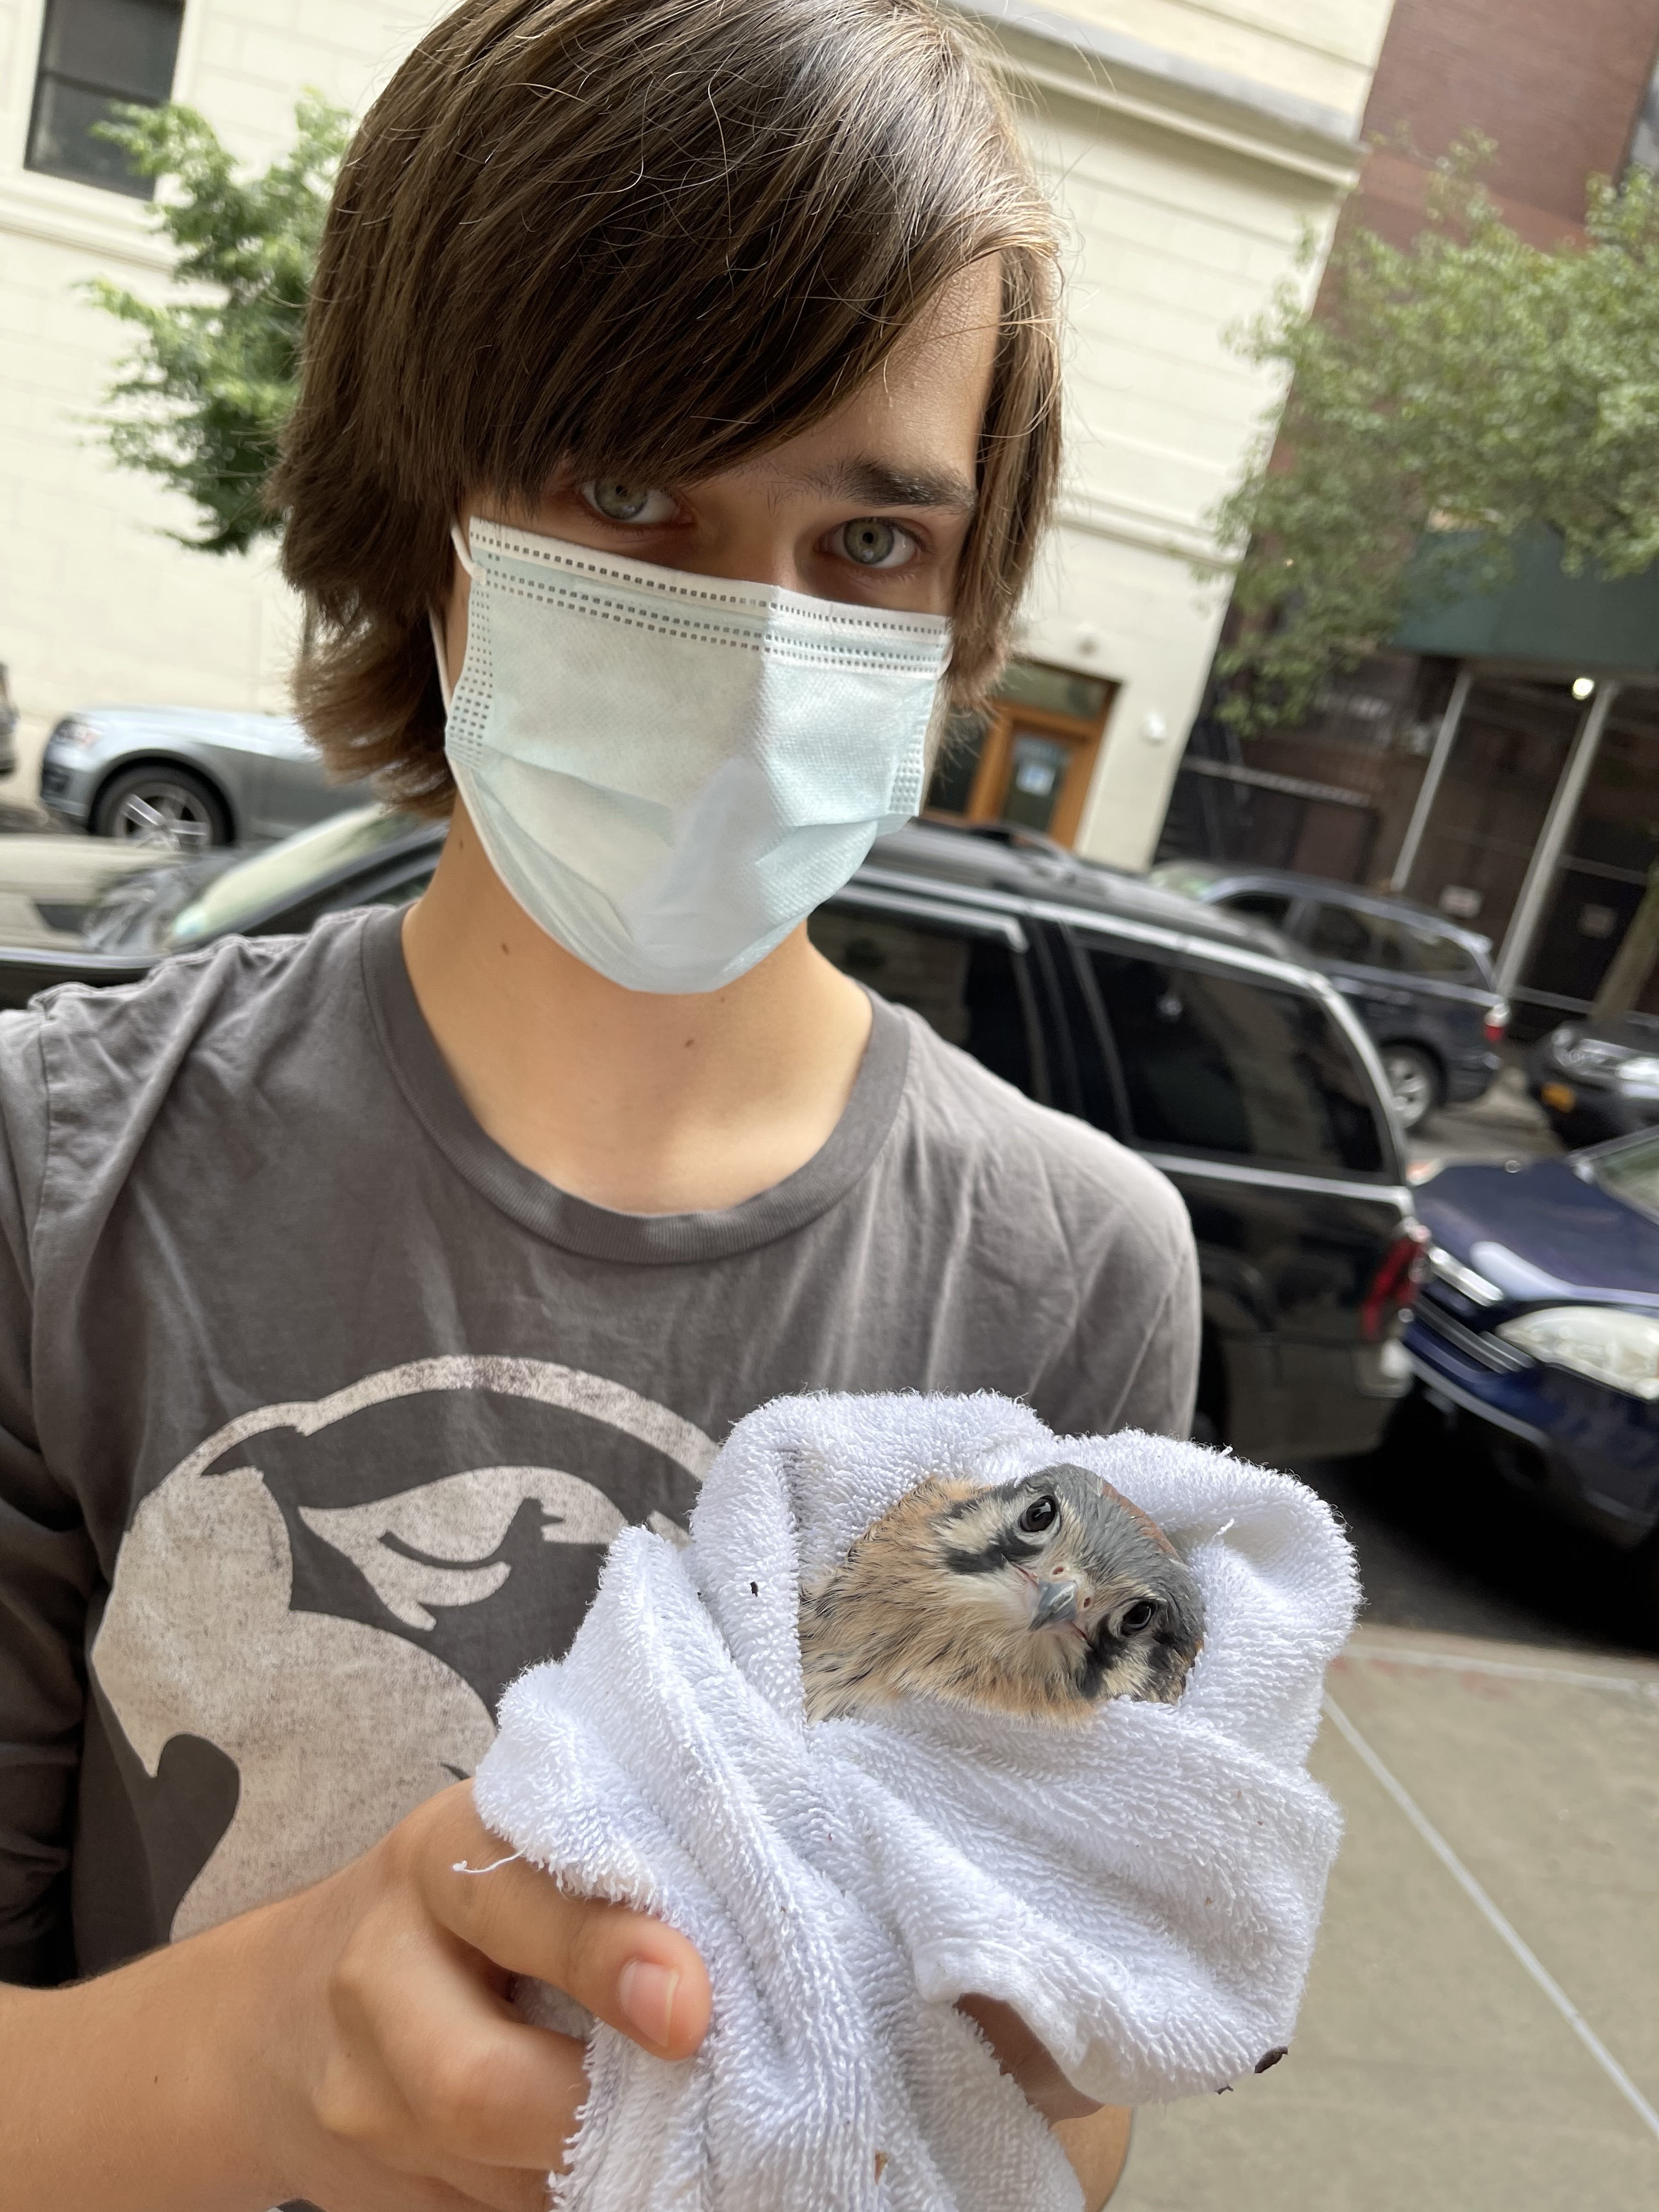 Young Conservationist Council Member Ryan Zucker shepherds the young kestrel to safety. Photo: Karen Benfield